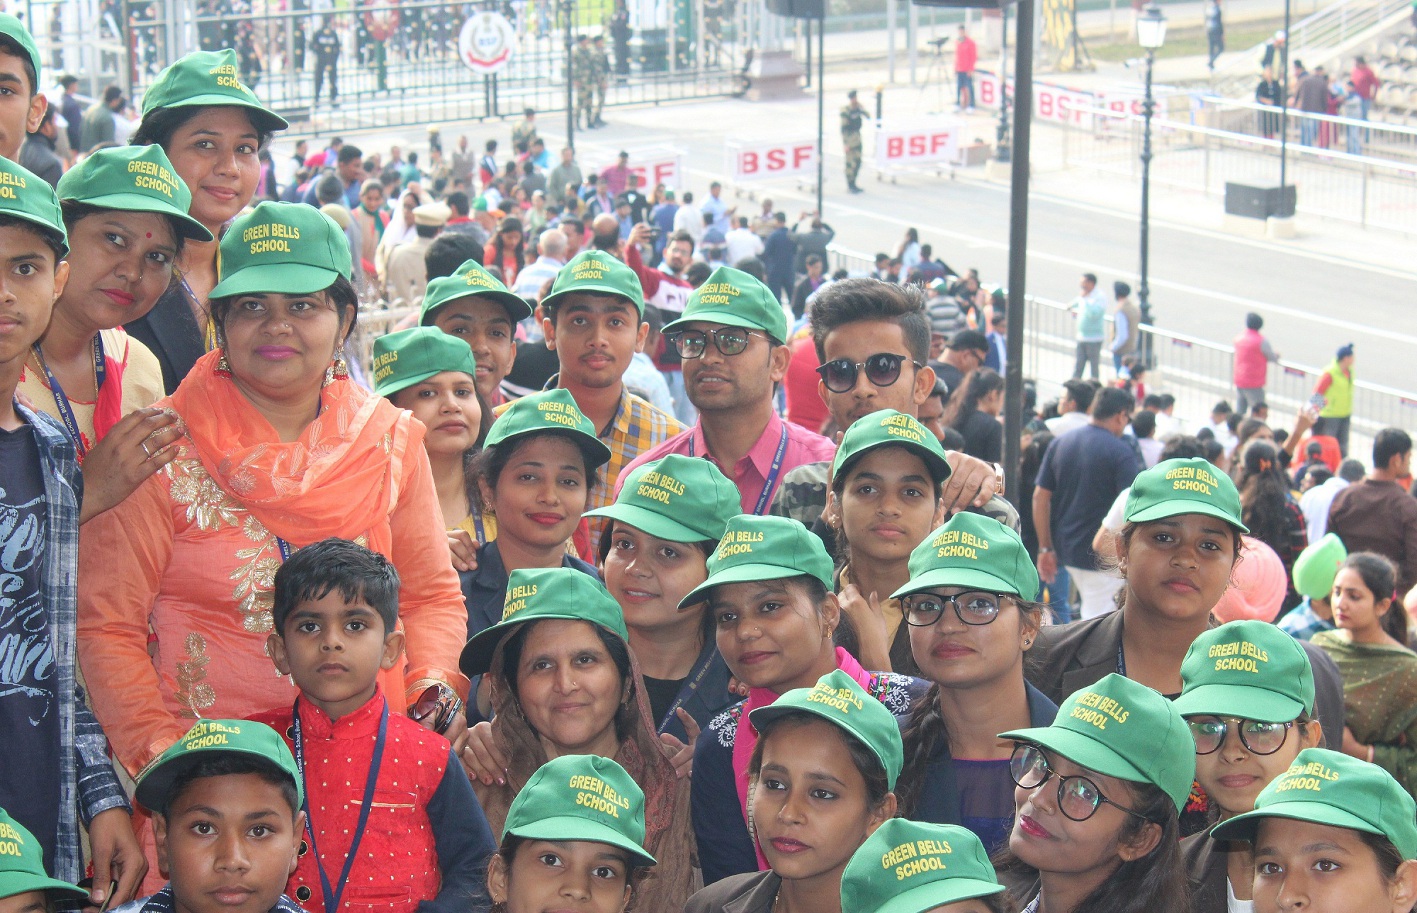  Students conducted Manjhi, Kullu and Shimla tours, also named Golden Temple in Punjab